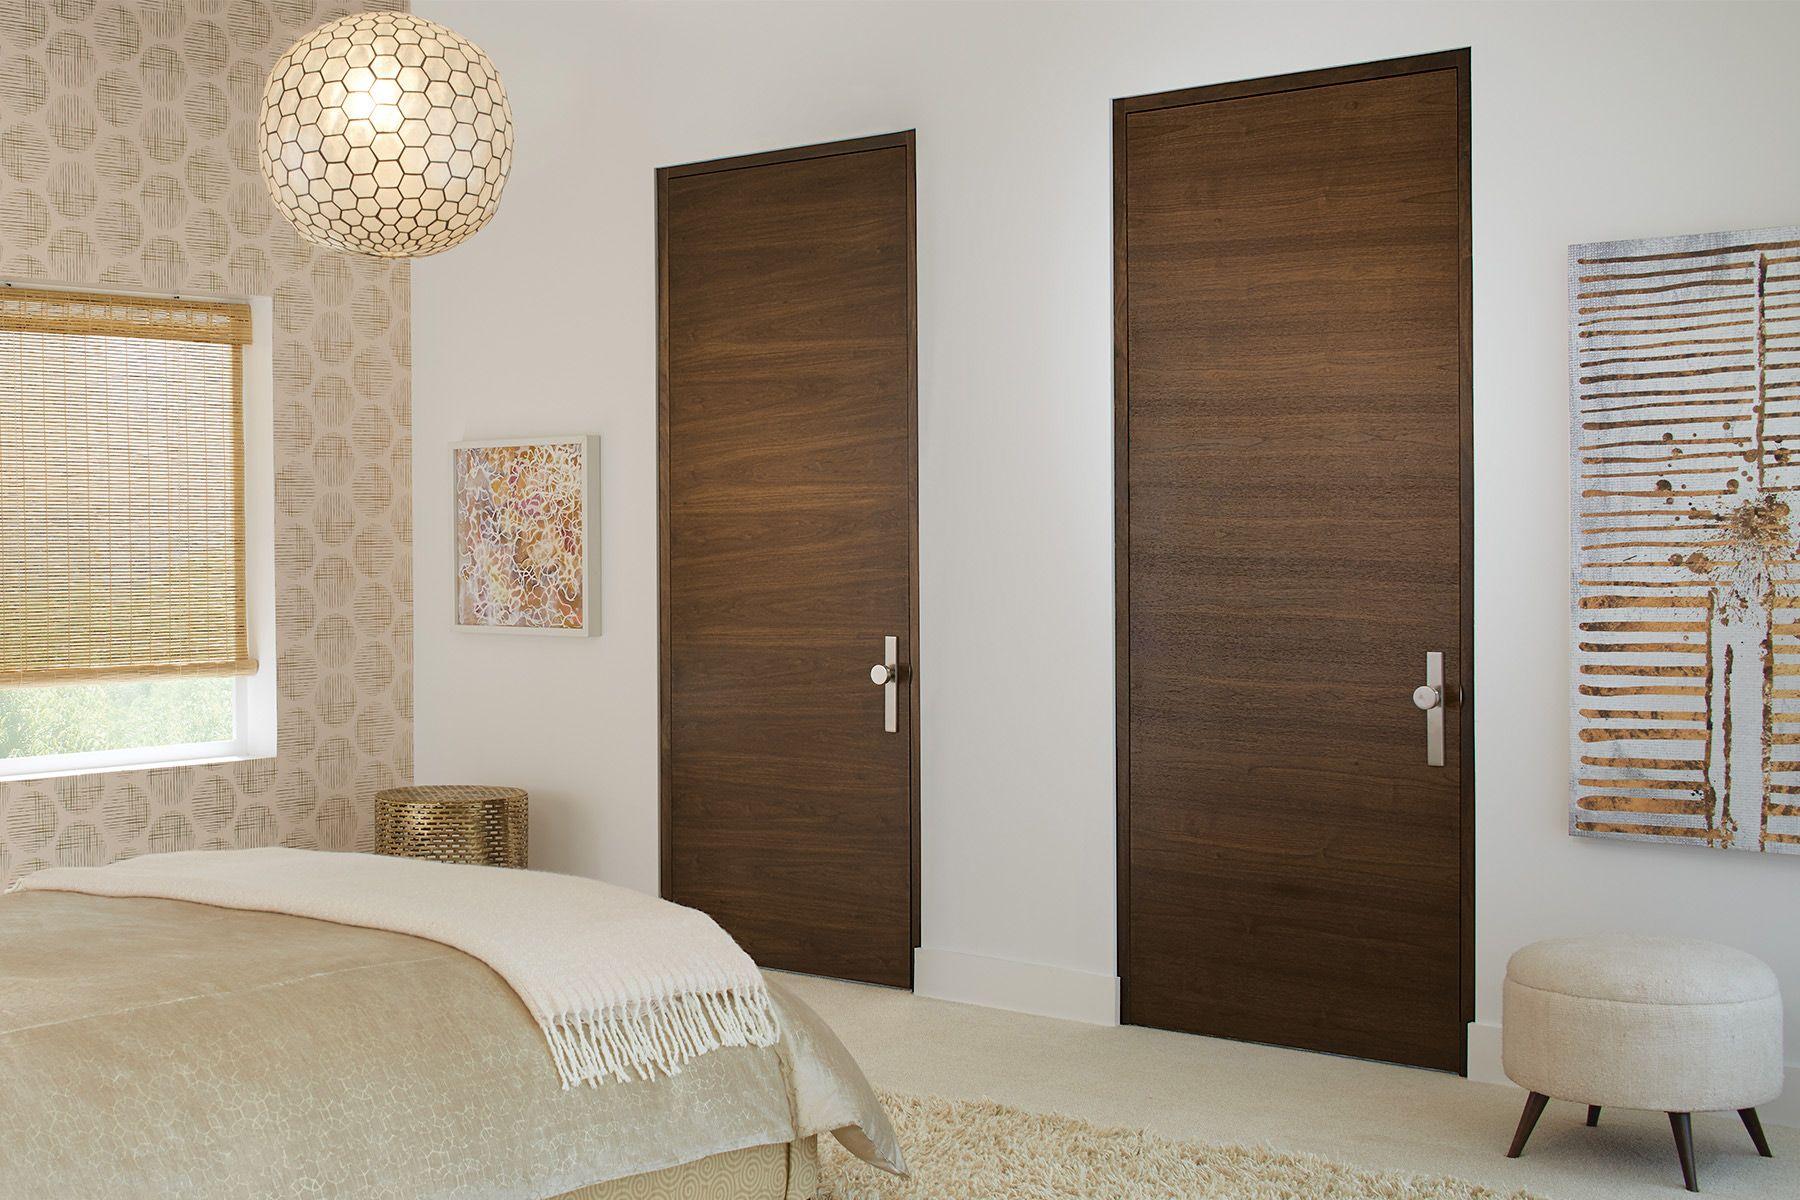 Bedroom featuring TMF1000 flush doors in walnut with Cappuccino stain